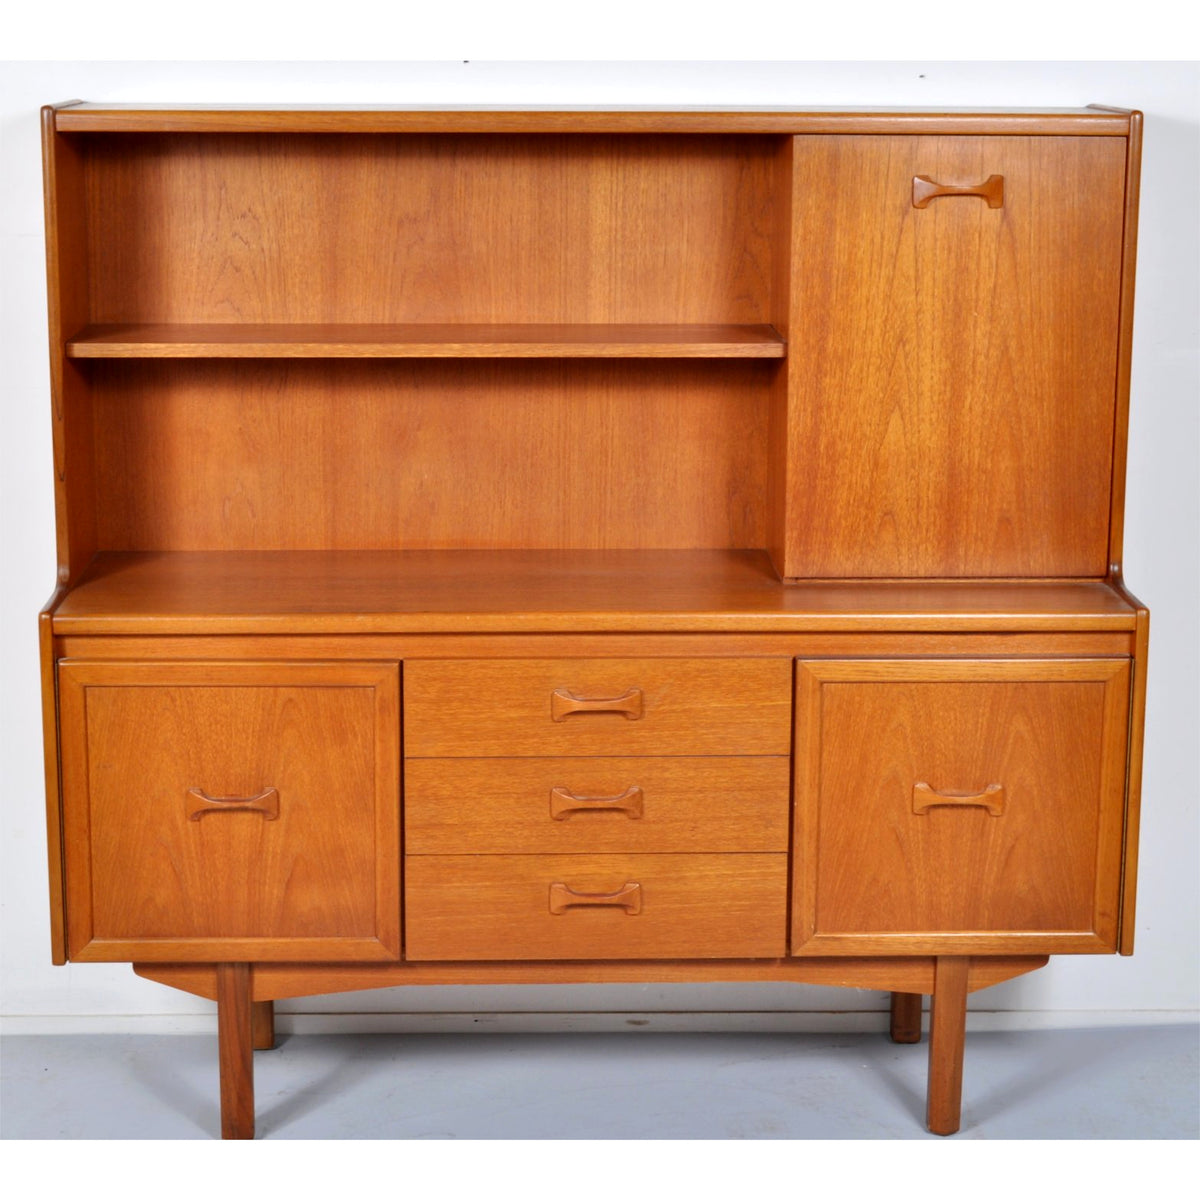 William Lawrence Bookcase Credenza with Fall-Front Door